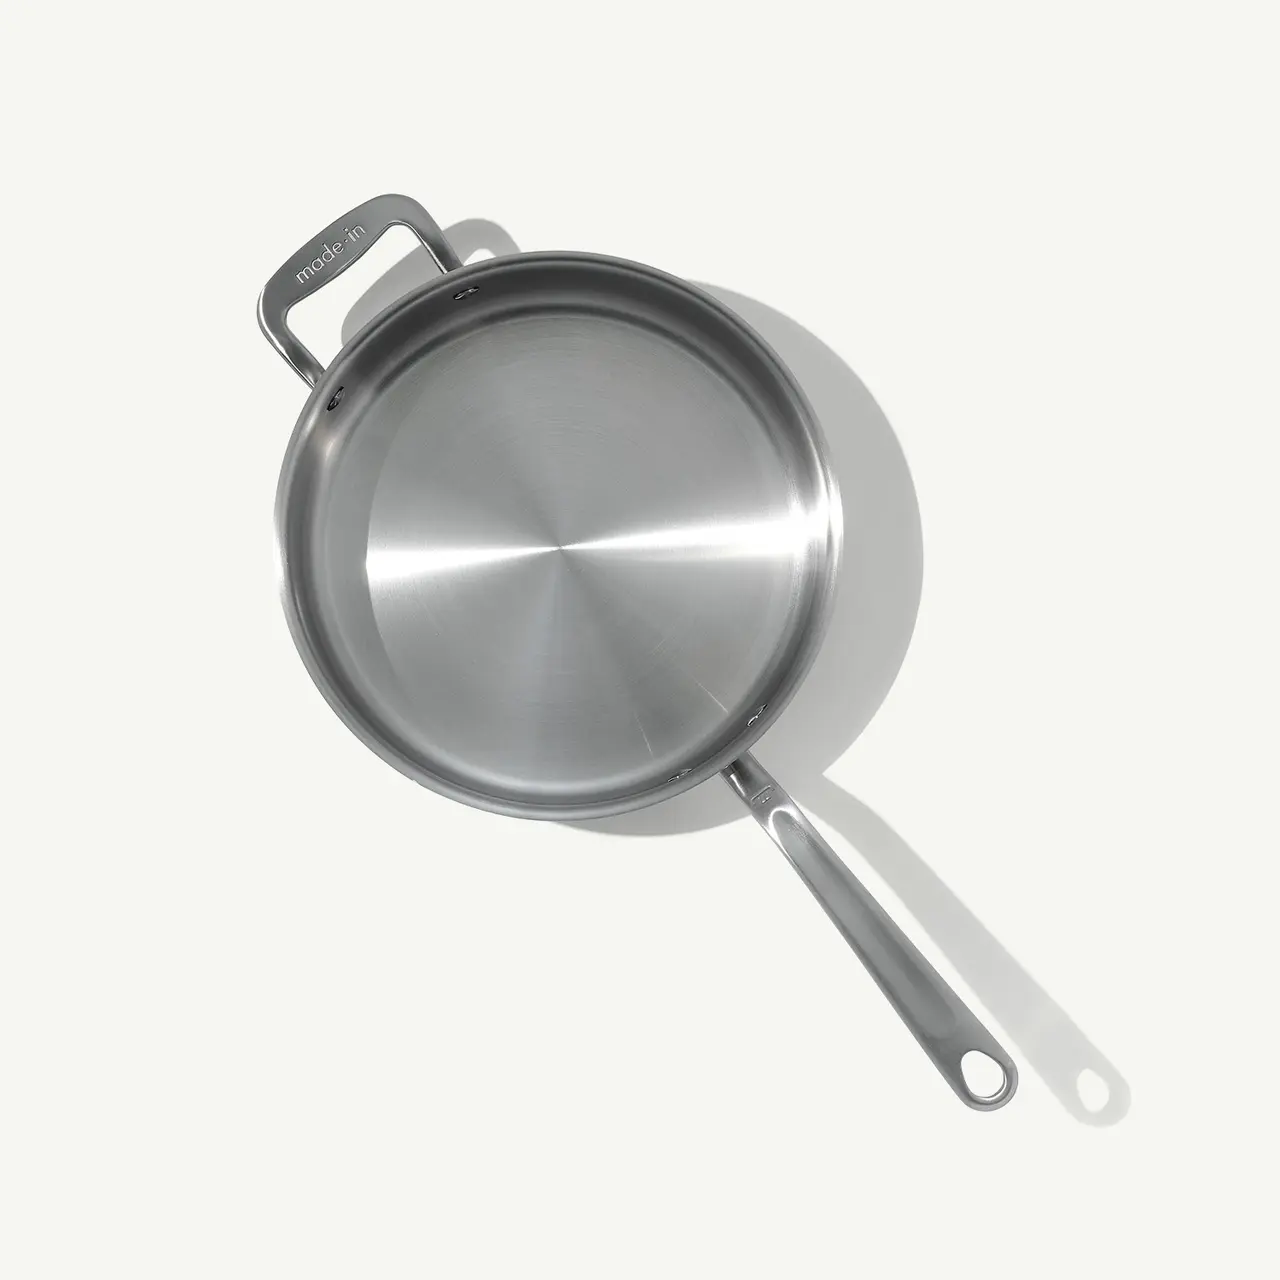 A stainless steel frying pan with a long handle is positioned against a plain background.